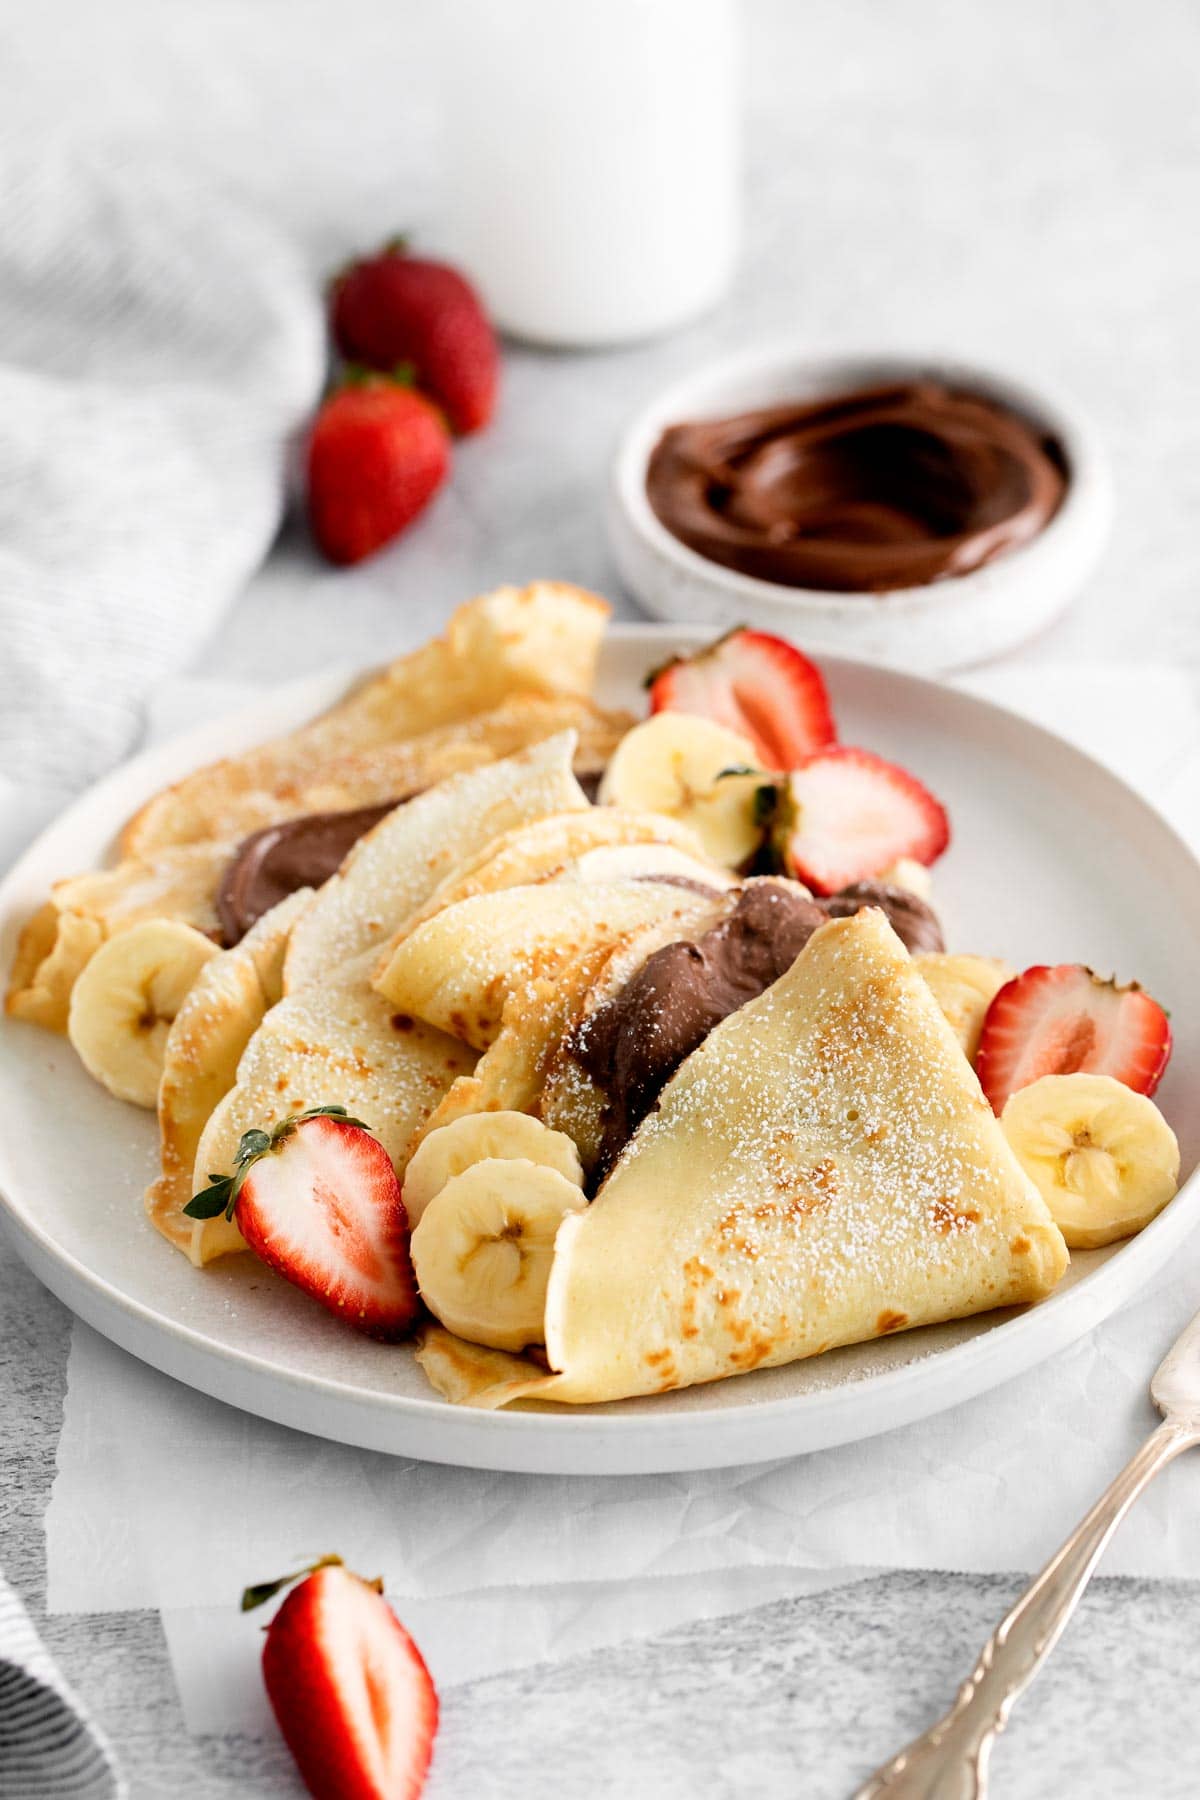 French crepes on a white plate garnished with strawberries, banana slices, and Nutella